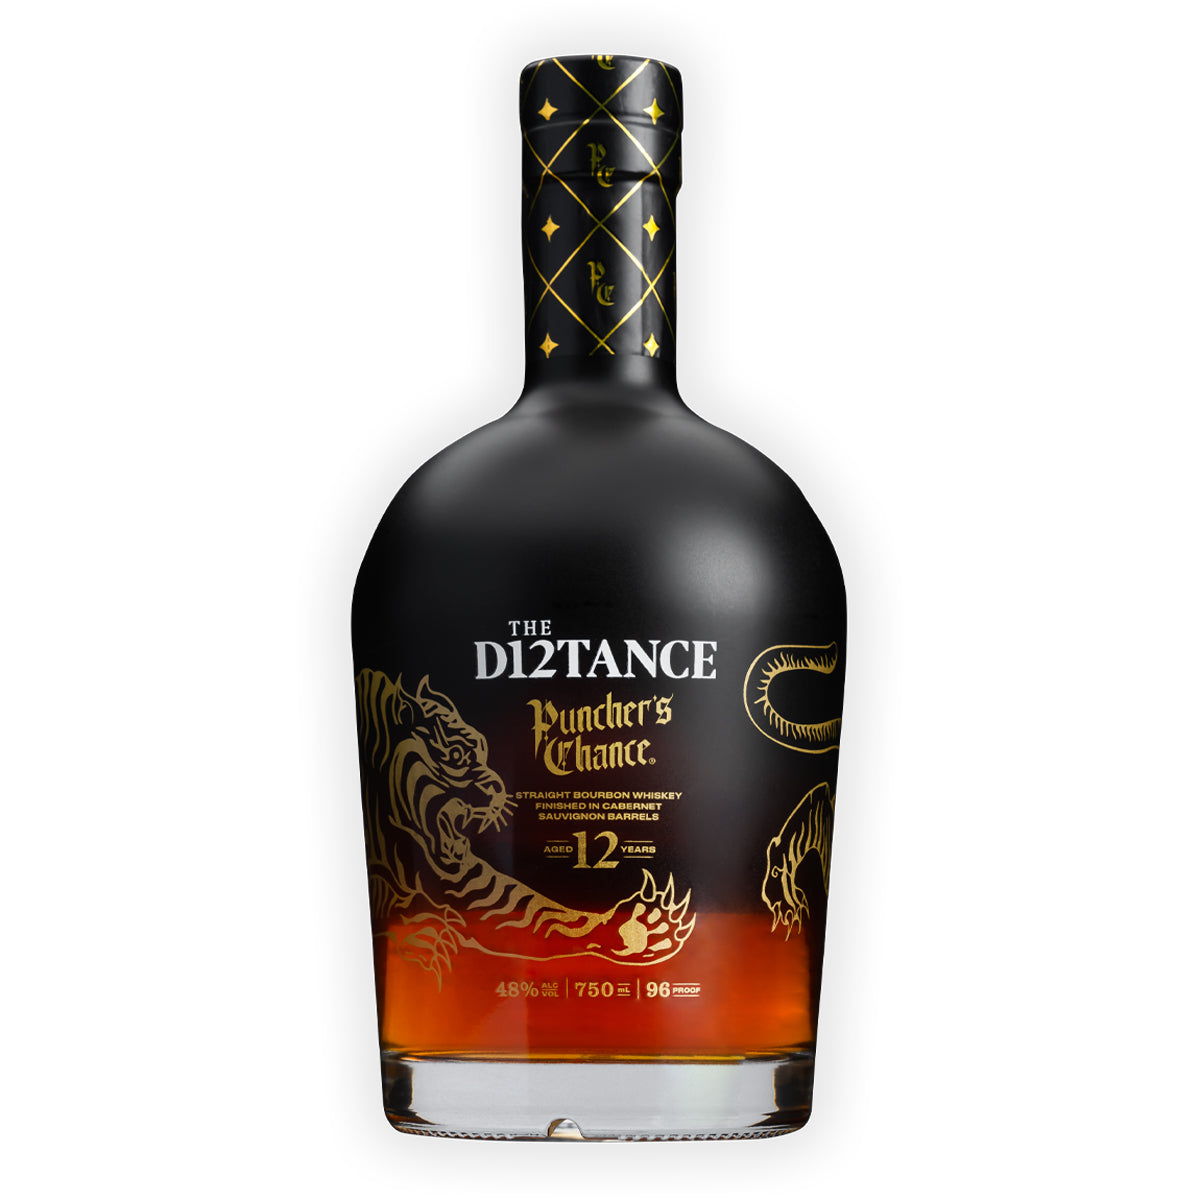 The D12TANCE™ 12-Year Tennessee Straight Bourbon Whiskey